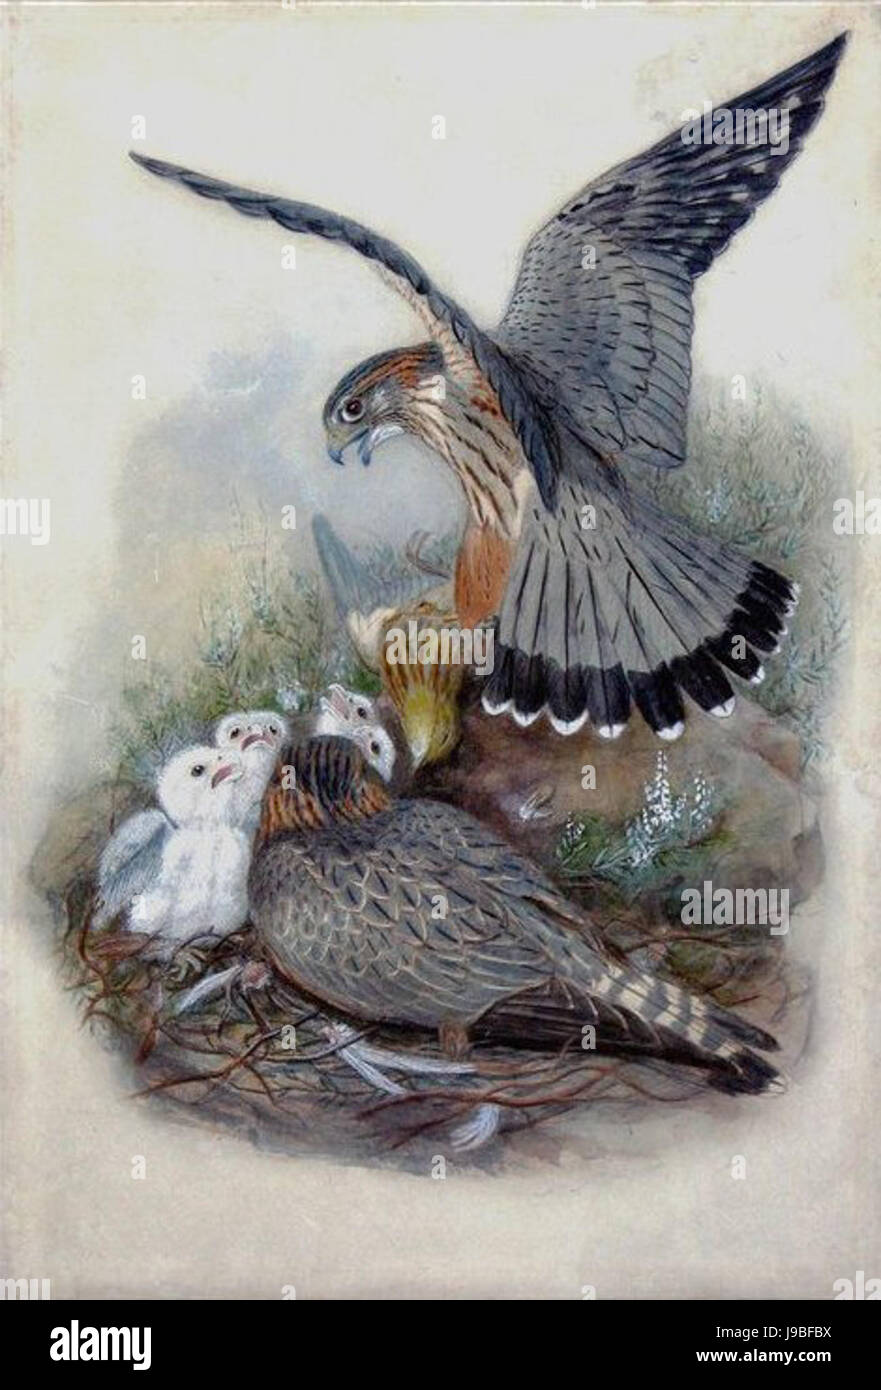 Merlin; Falco aesalon; Falco columbarius Linnaeus by Joseph Wolf (1820 1899), Pencil and watercolor heightened with bodycolor, white heightening and gum arabic. c. 1862 73, Arader Galleries, New York City Stock Photo